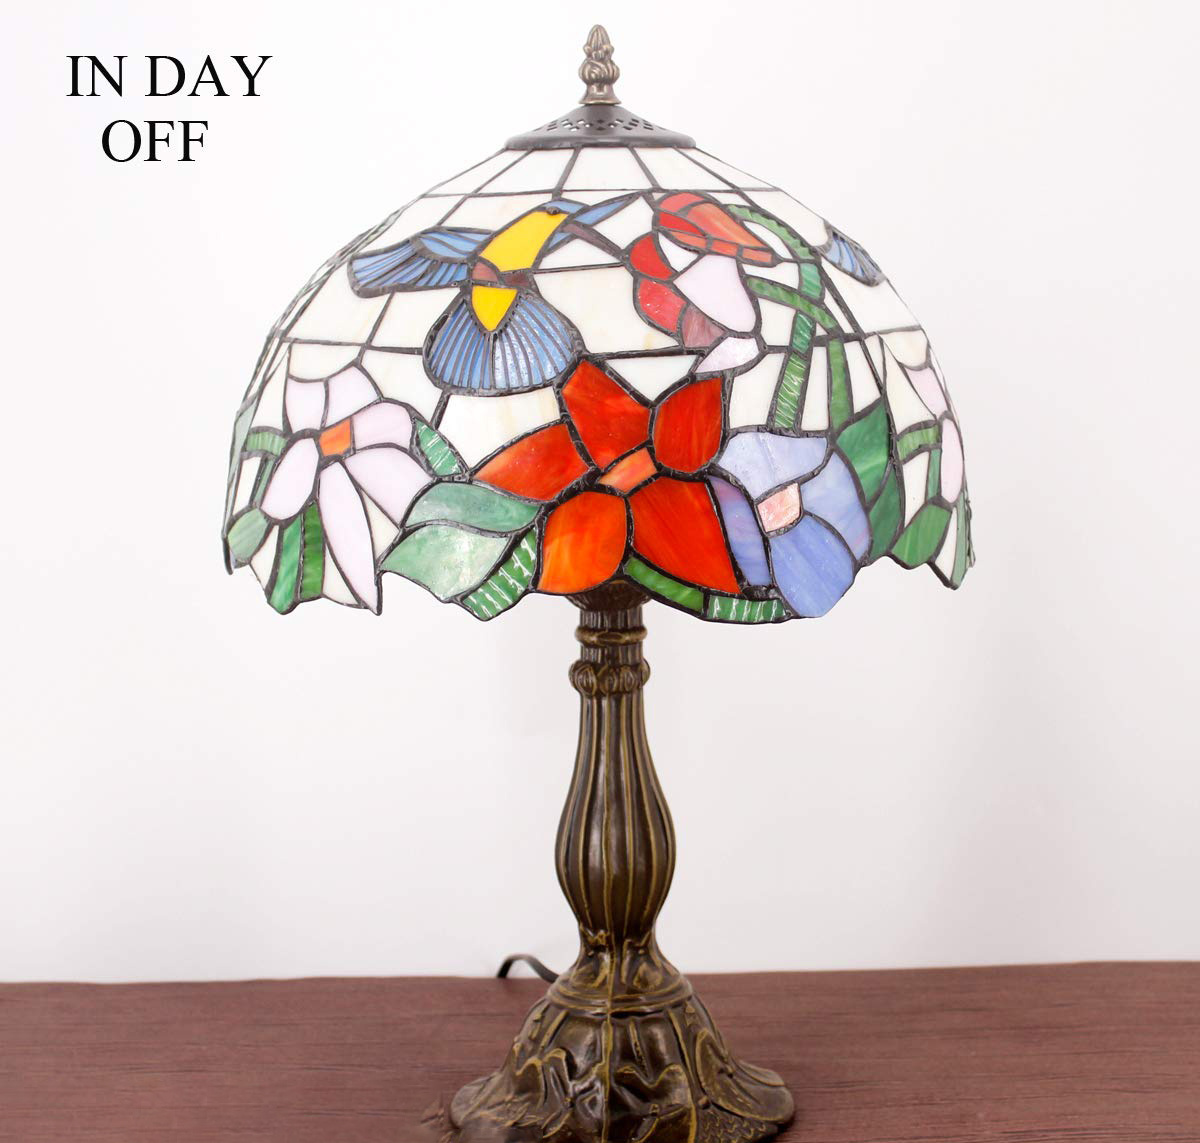 Stained Glass Lamp, Hummingbird Style Bedside Lamp Reading Light 12 x 12 x 18 Inch Decor for Bedroom Living Room Home Office